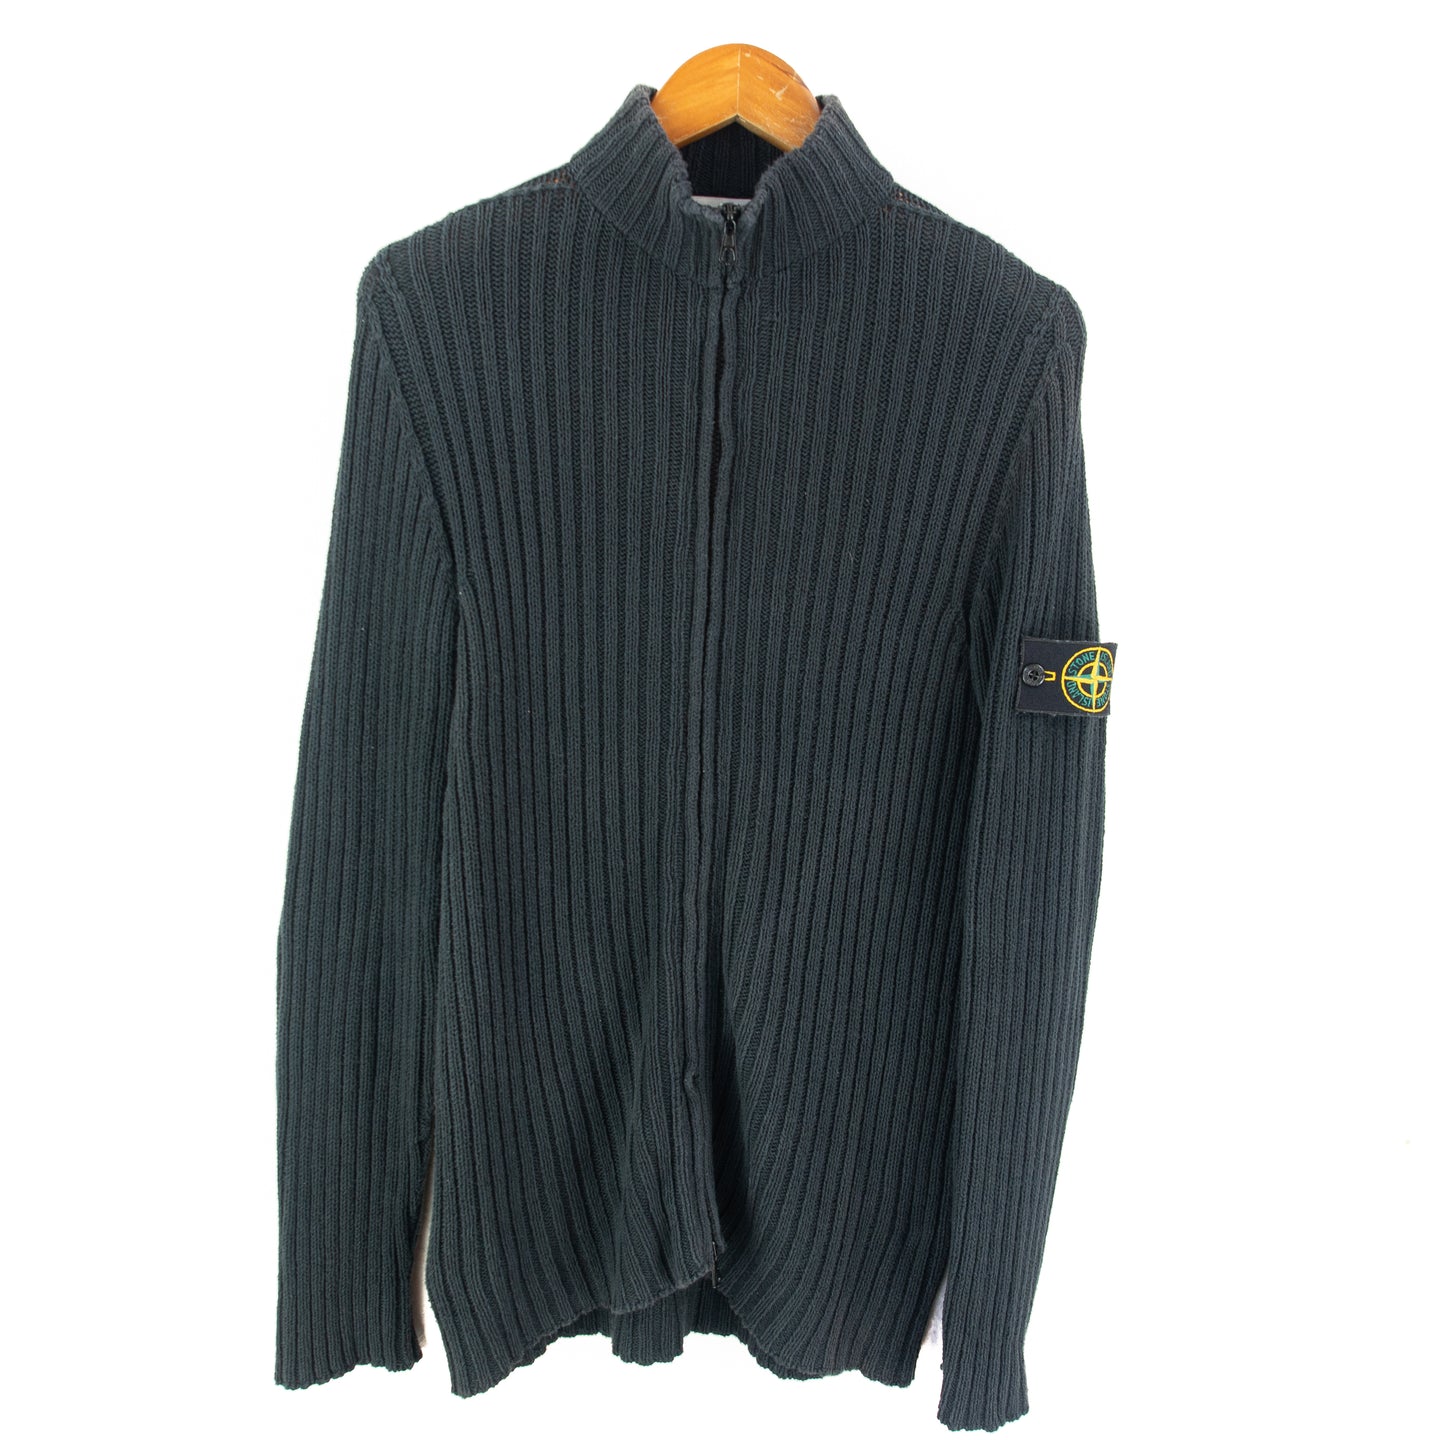 VINTAGE STONE ISLAND KNITTED ZIP UP - L